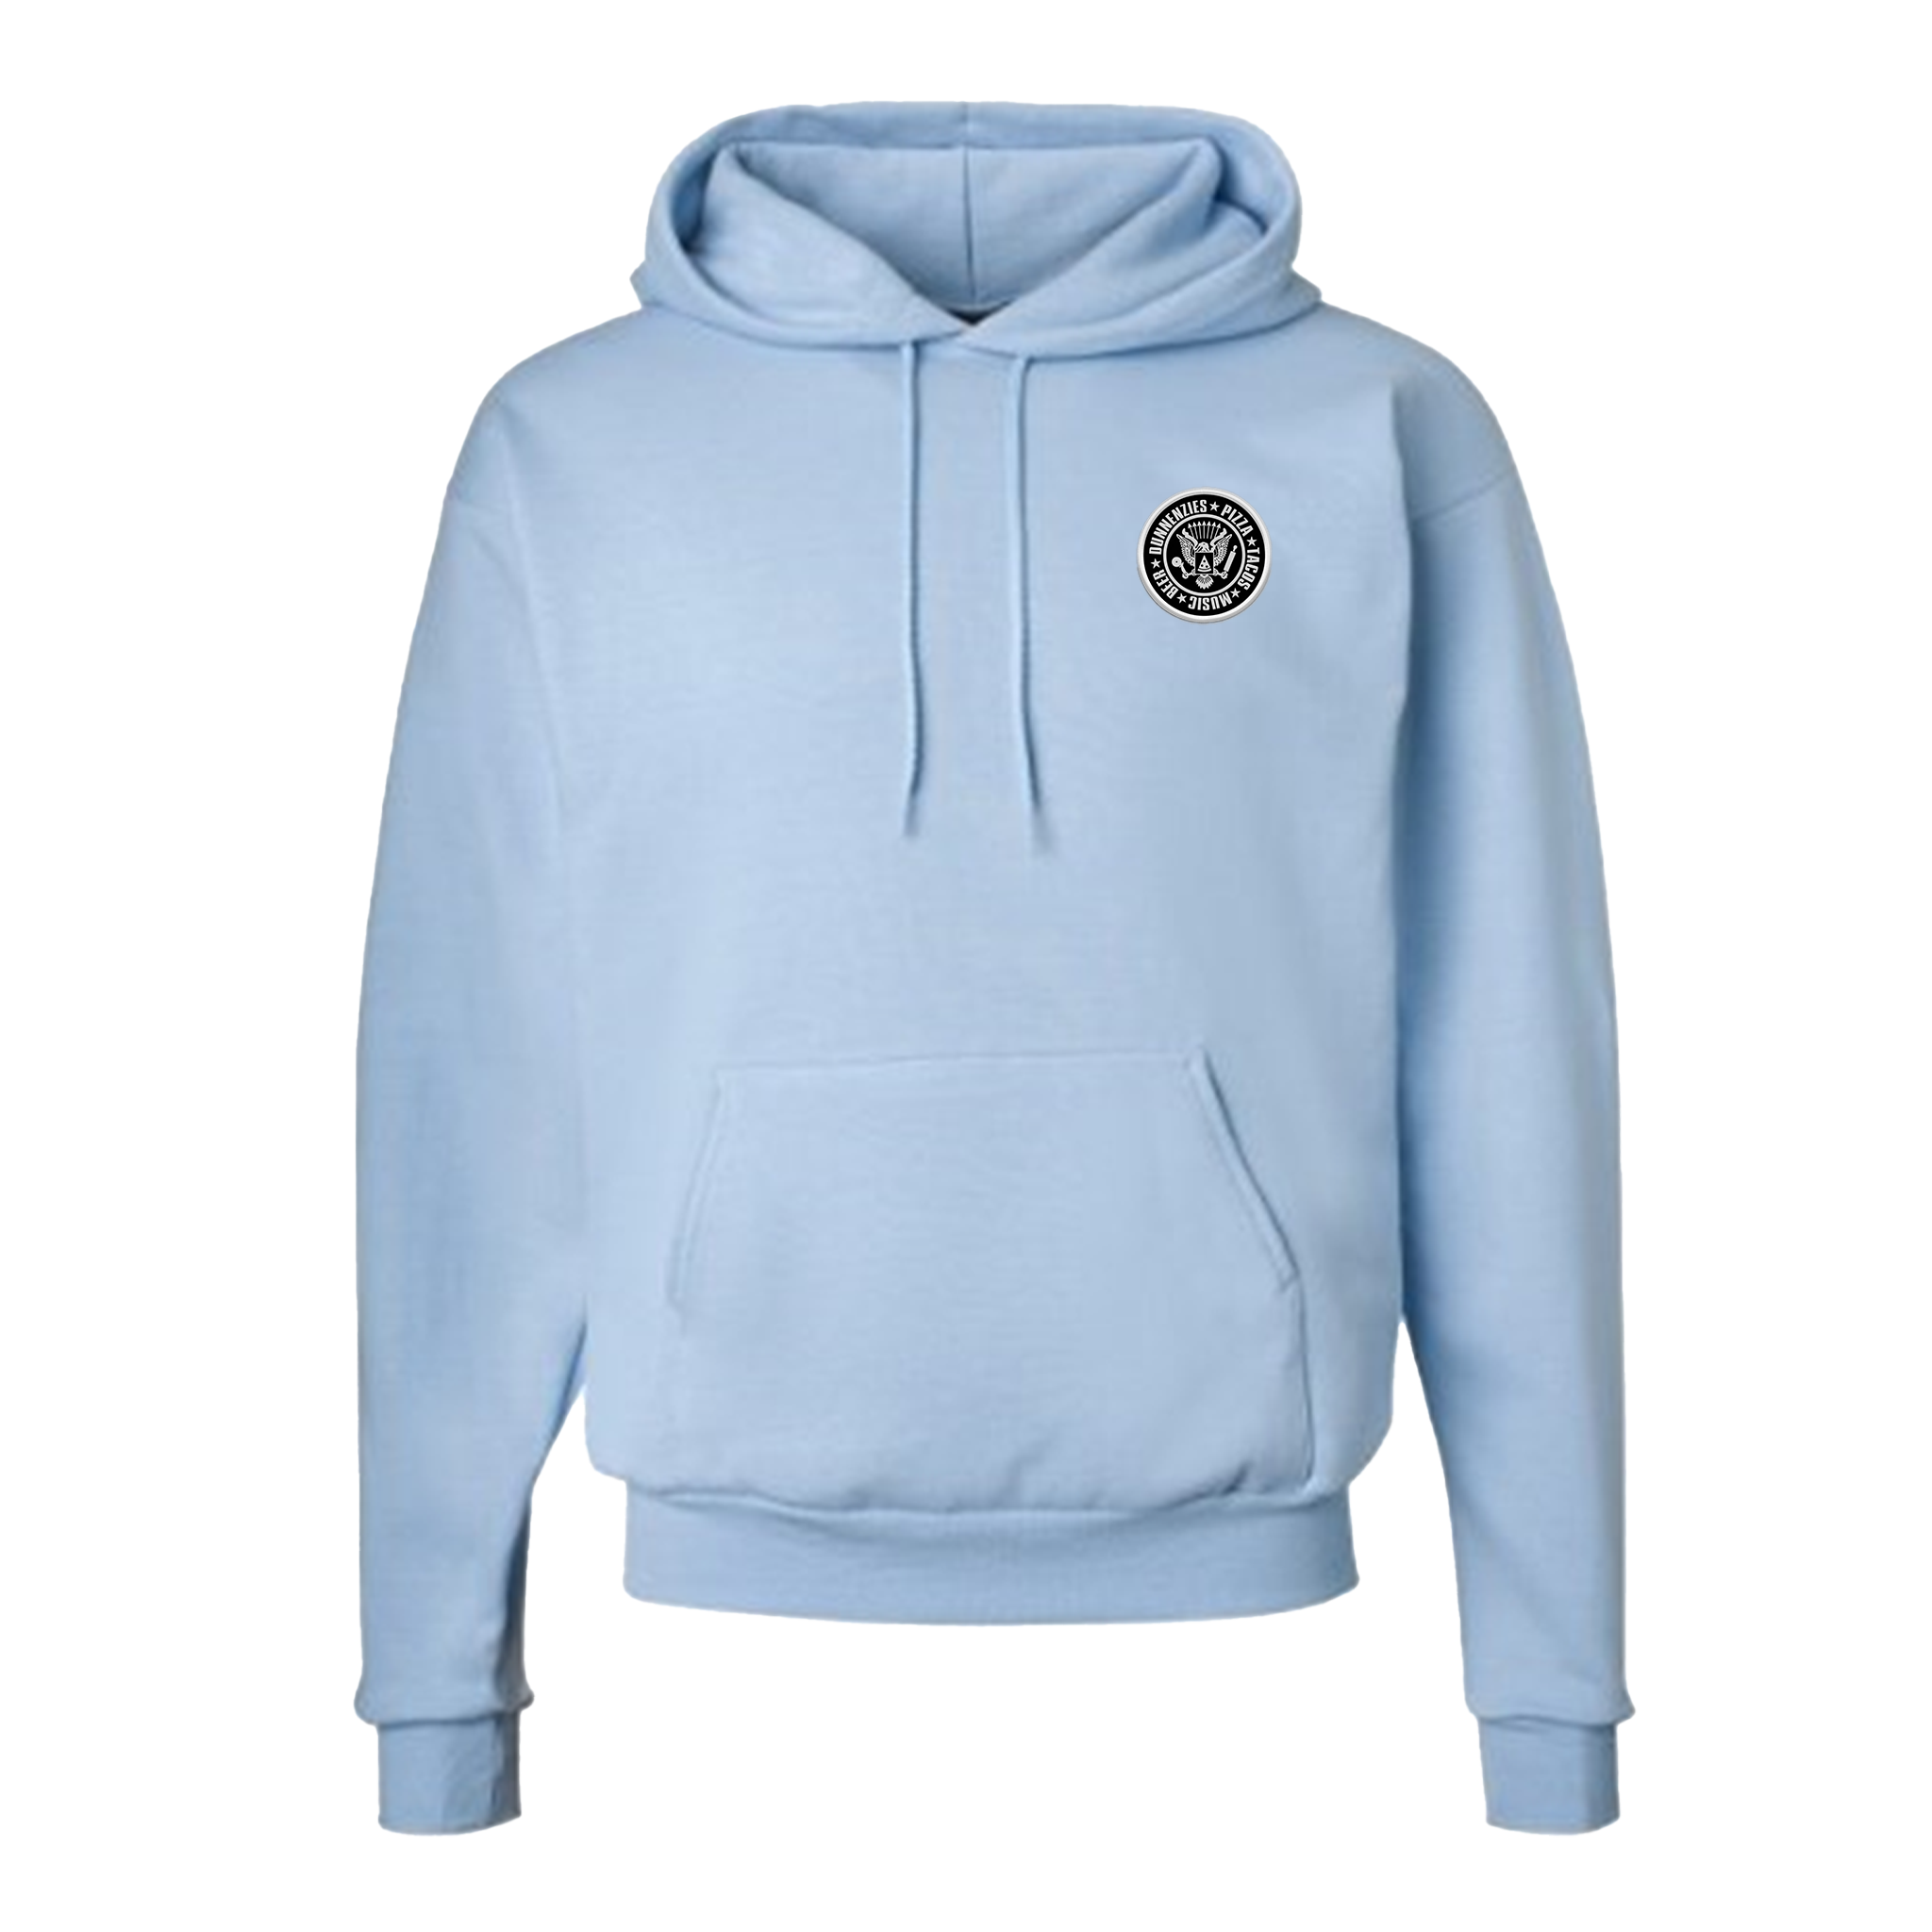 Dunnenzies Refelections Apparel Hoodie - Unisex Sizing XS-4XL - Powder Blue